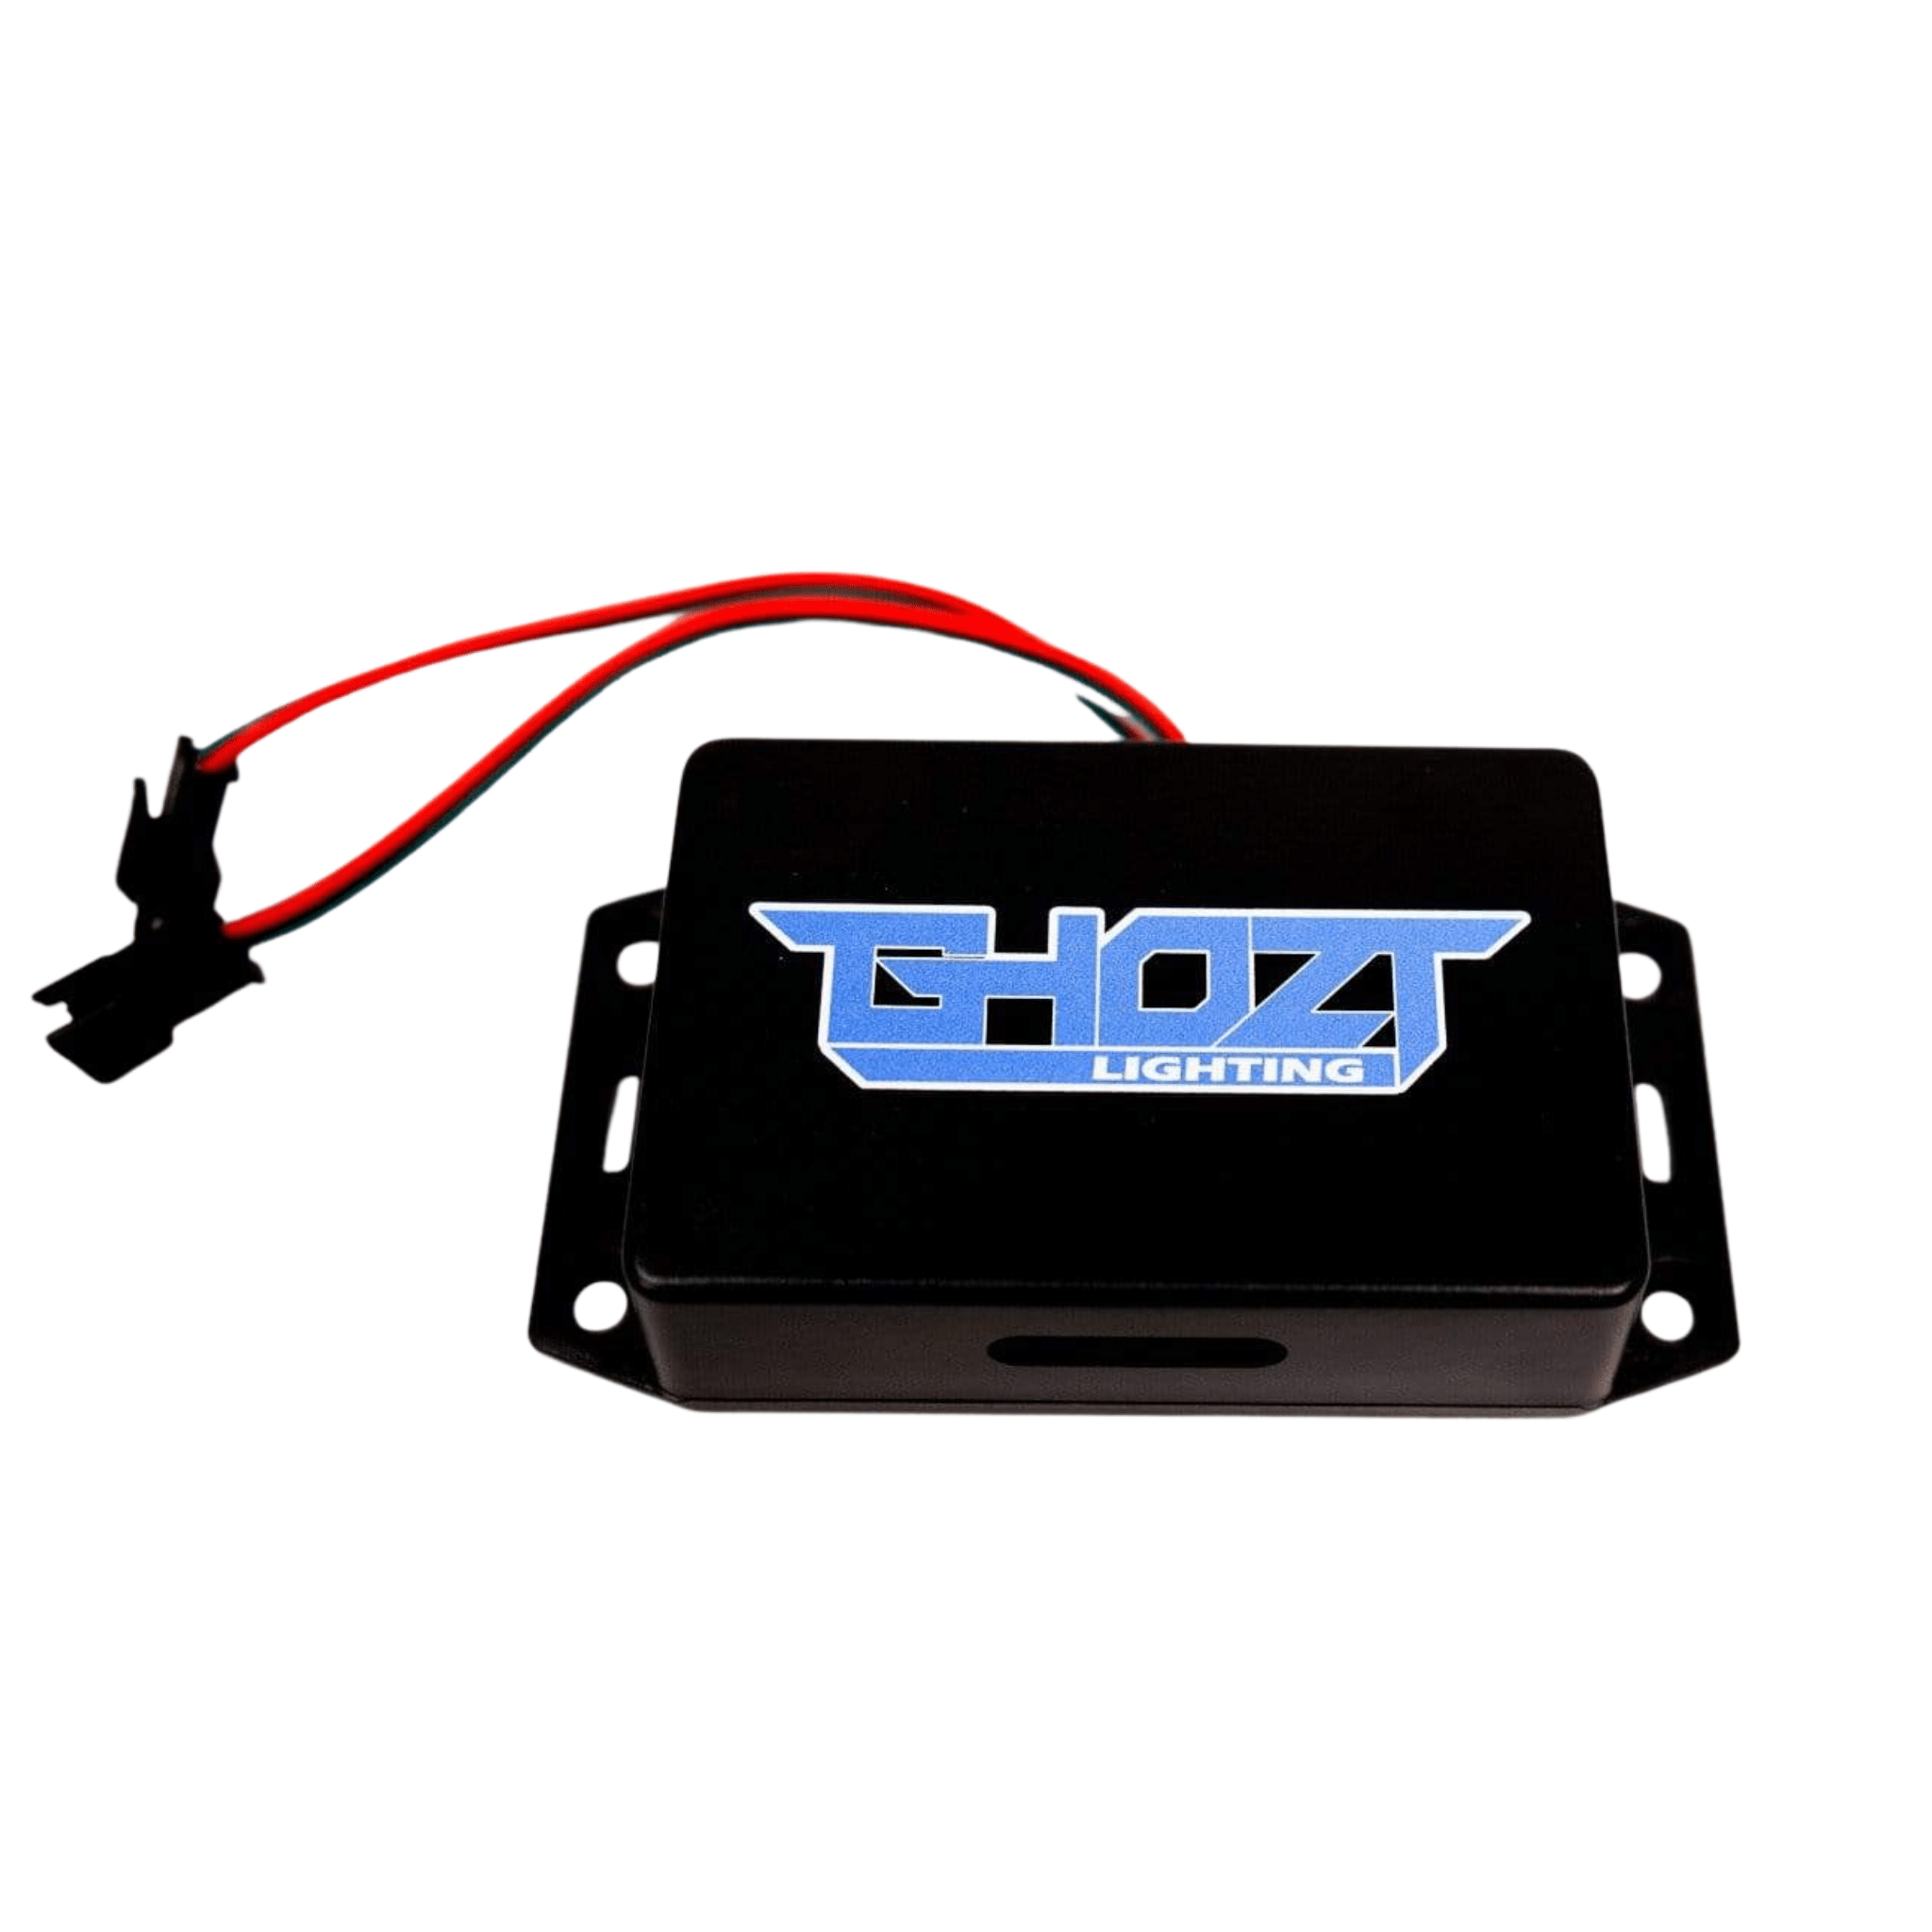 Blueghozt Bluetooth Controller (Flow Series / Color Chasing) - RGB Halo Kits Multicolor Flow Series Color Chasing RGBWA LED headlight kit Colorshift Oracle Lighting Trendz OneUpLighting Morimoto theretrofitsource AutoLEDTech Diode Dynamics